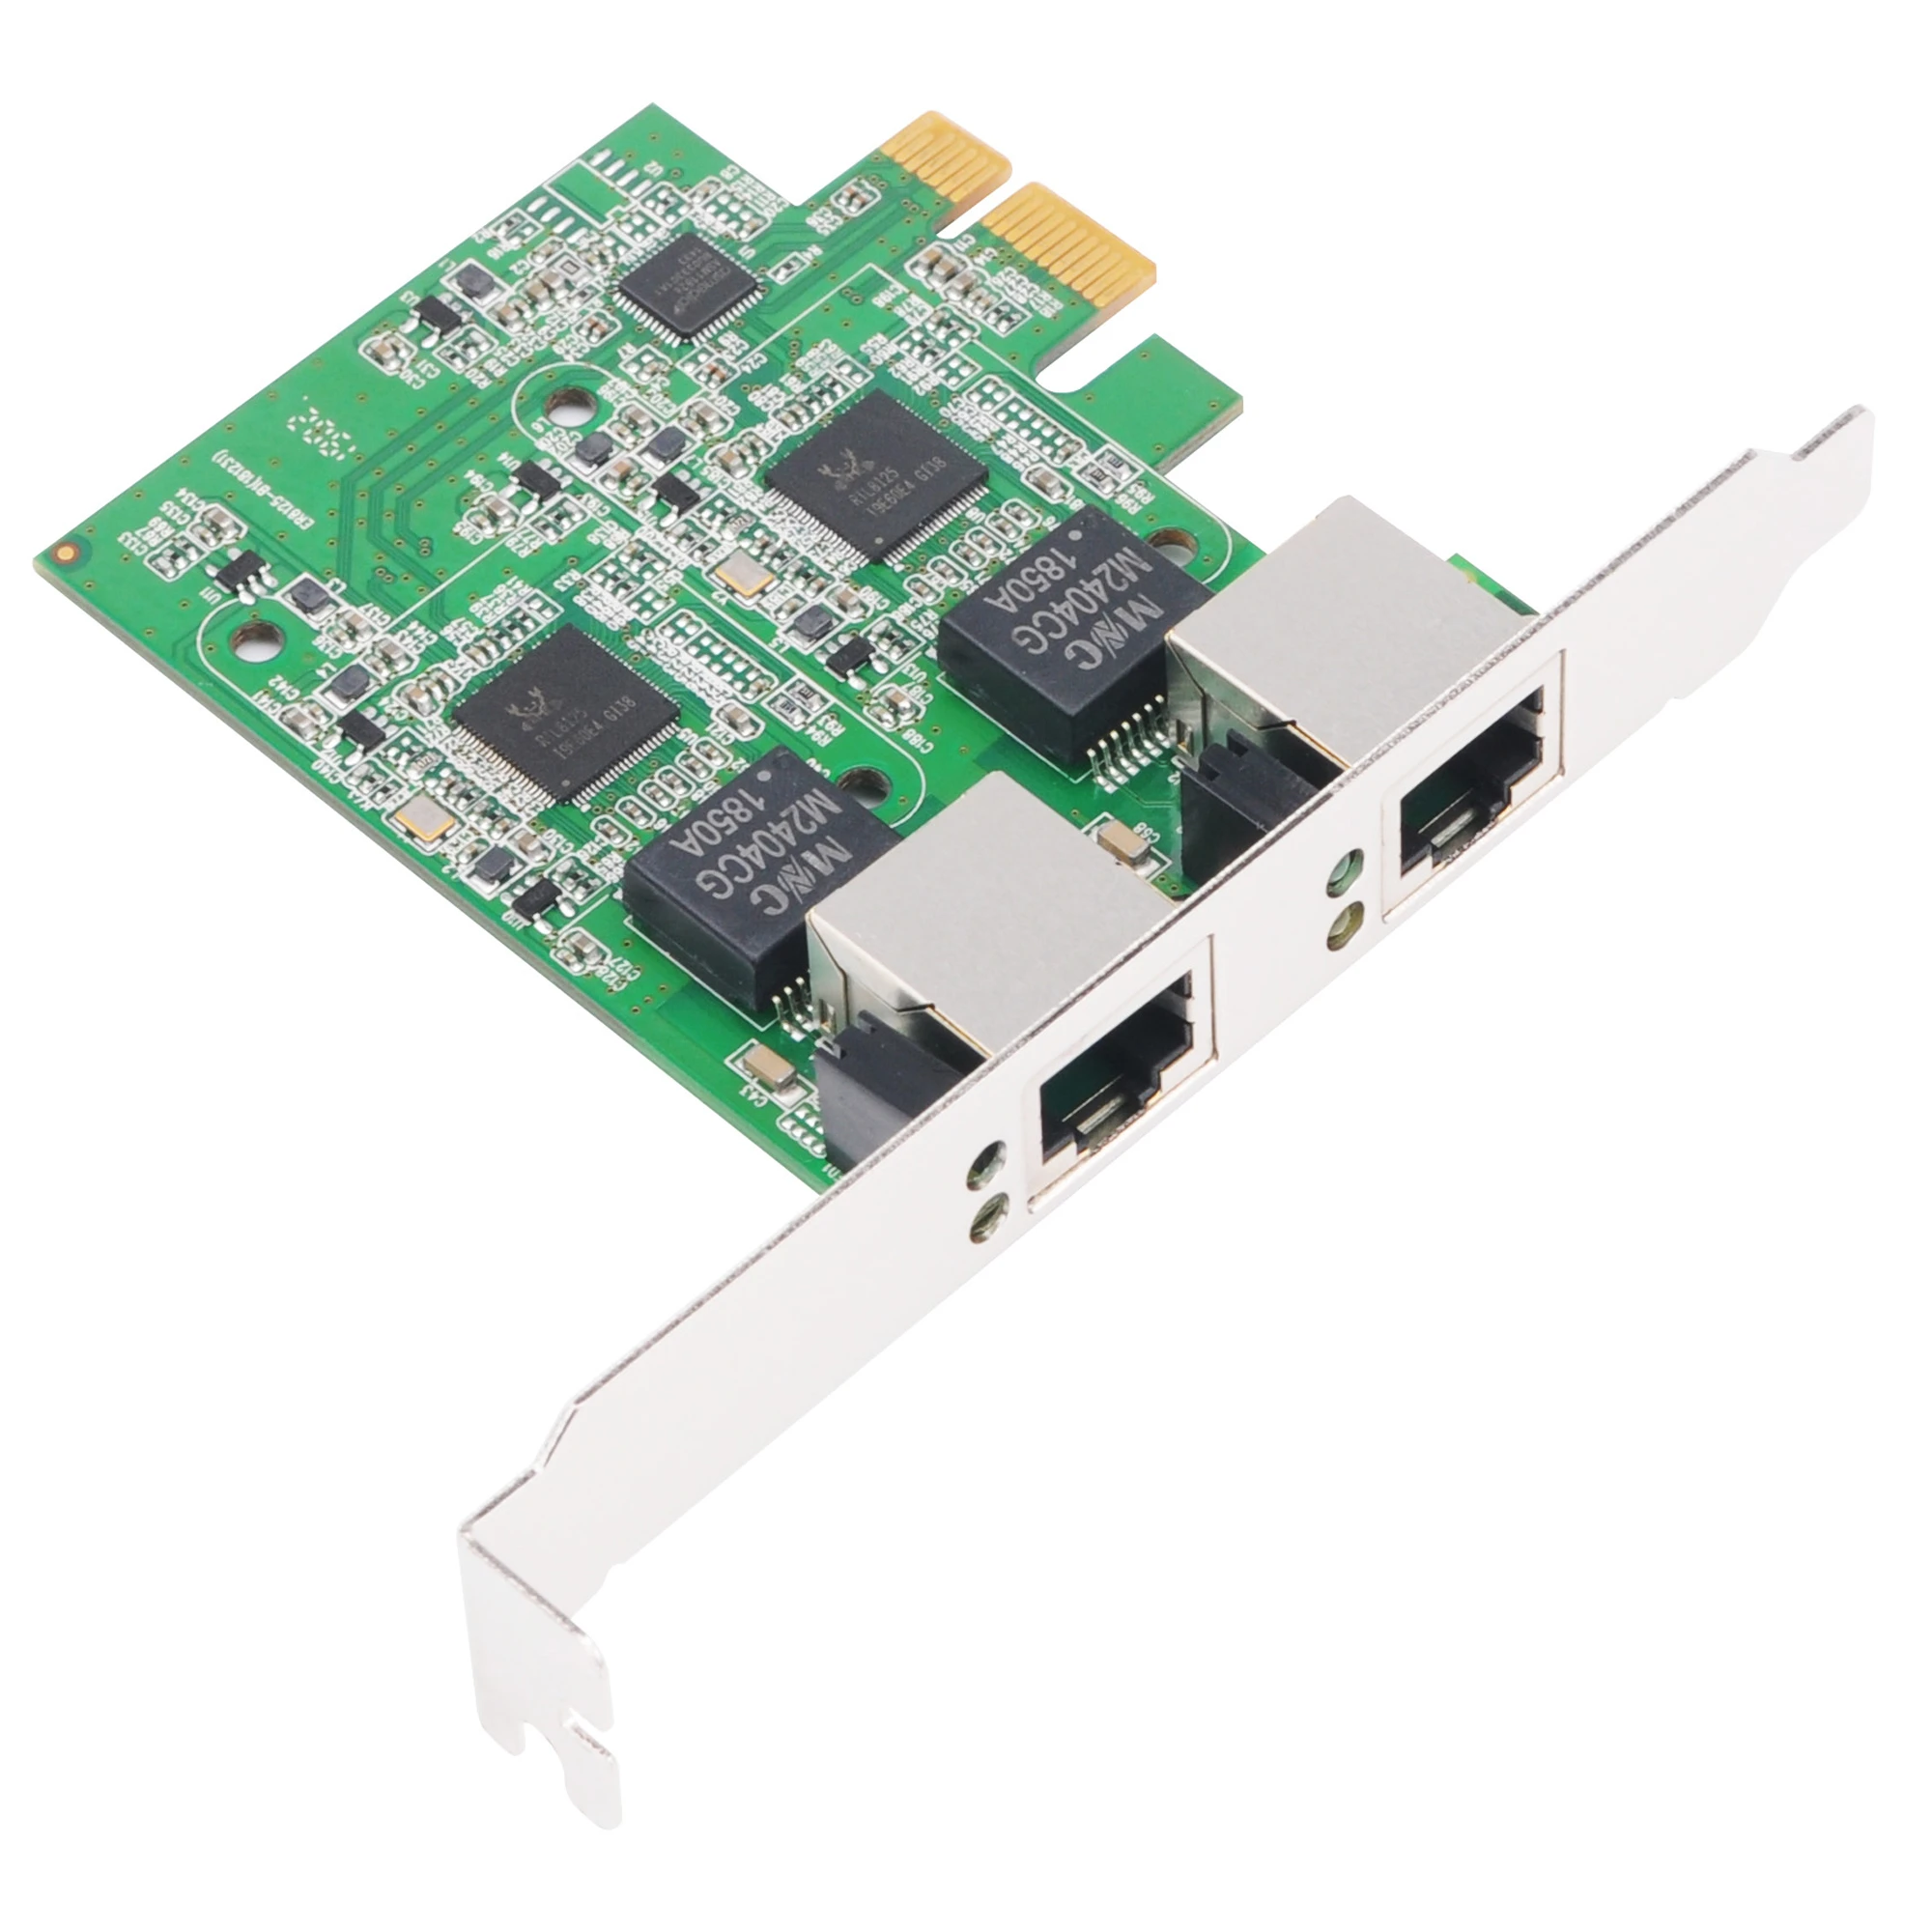 PCIe Dual Multi Ethernet LAN Card / PCI-Express Dual 2.5G Network Controller Adapter Card